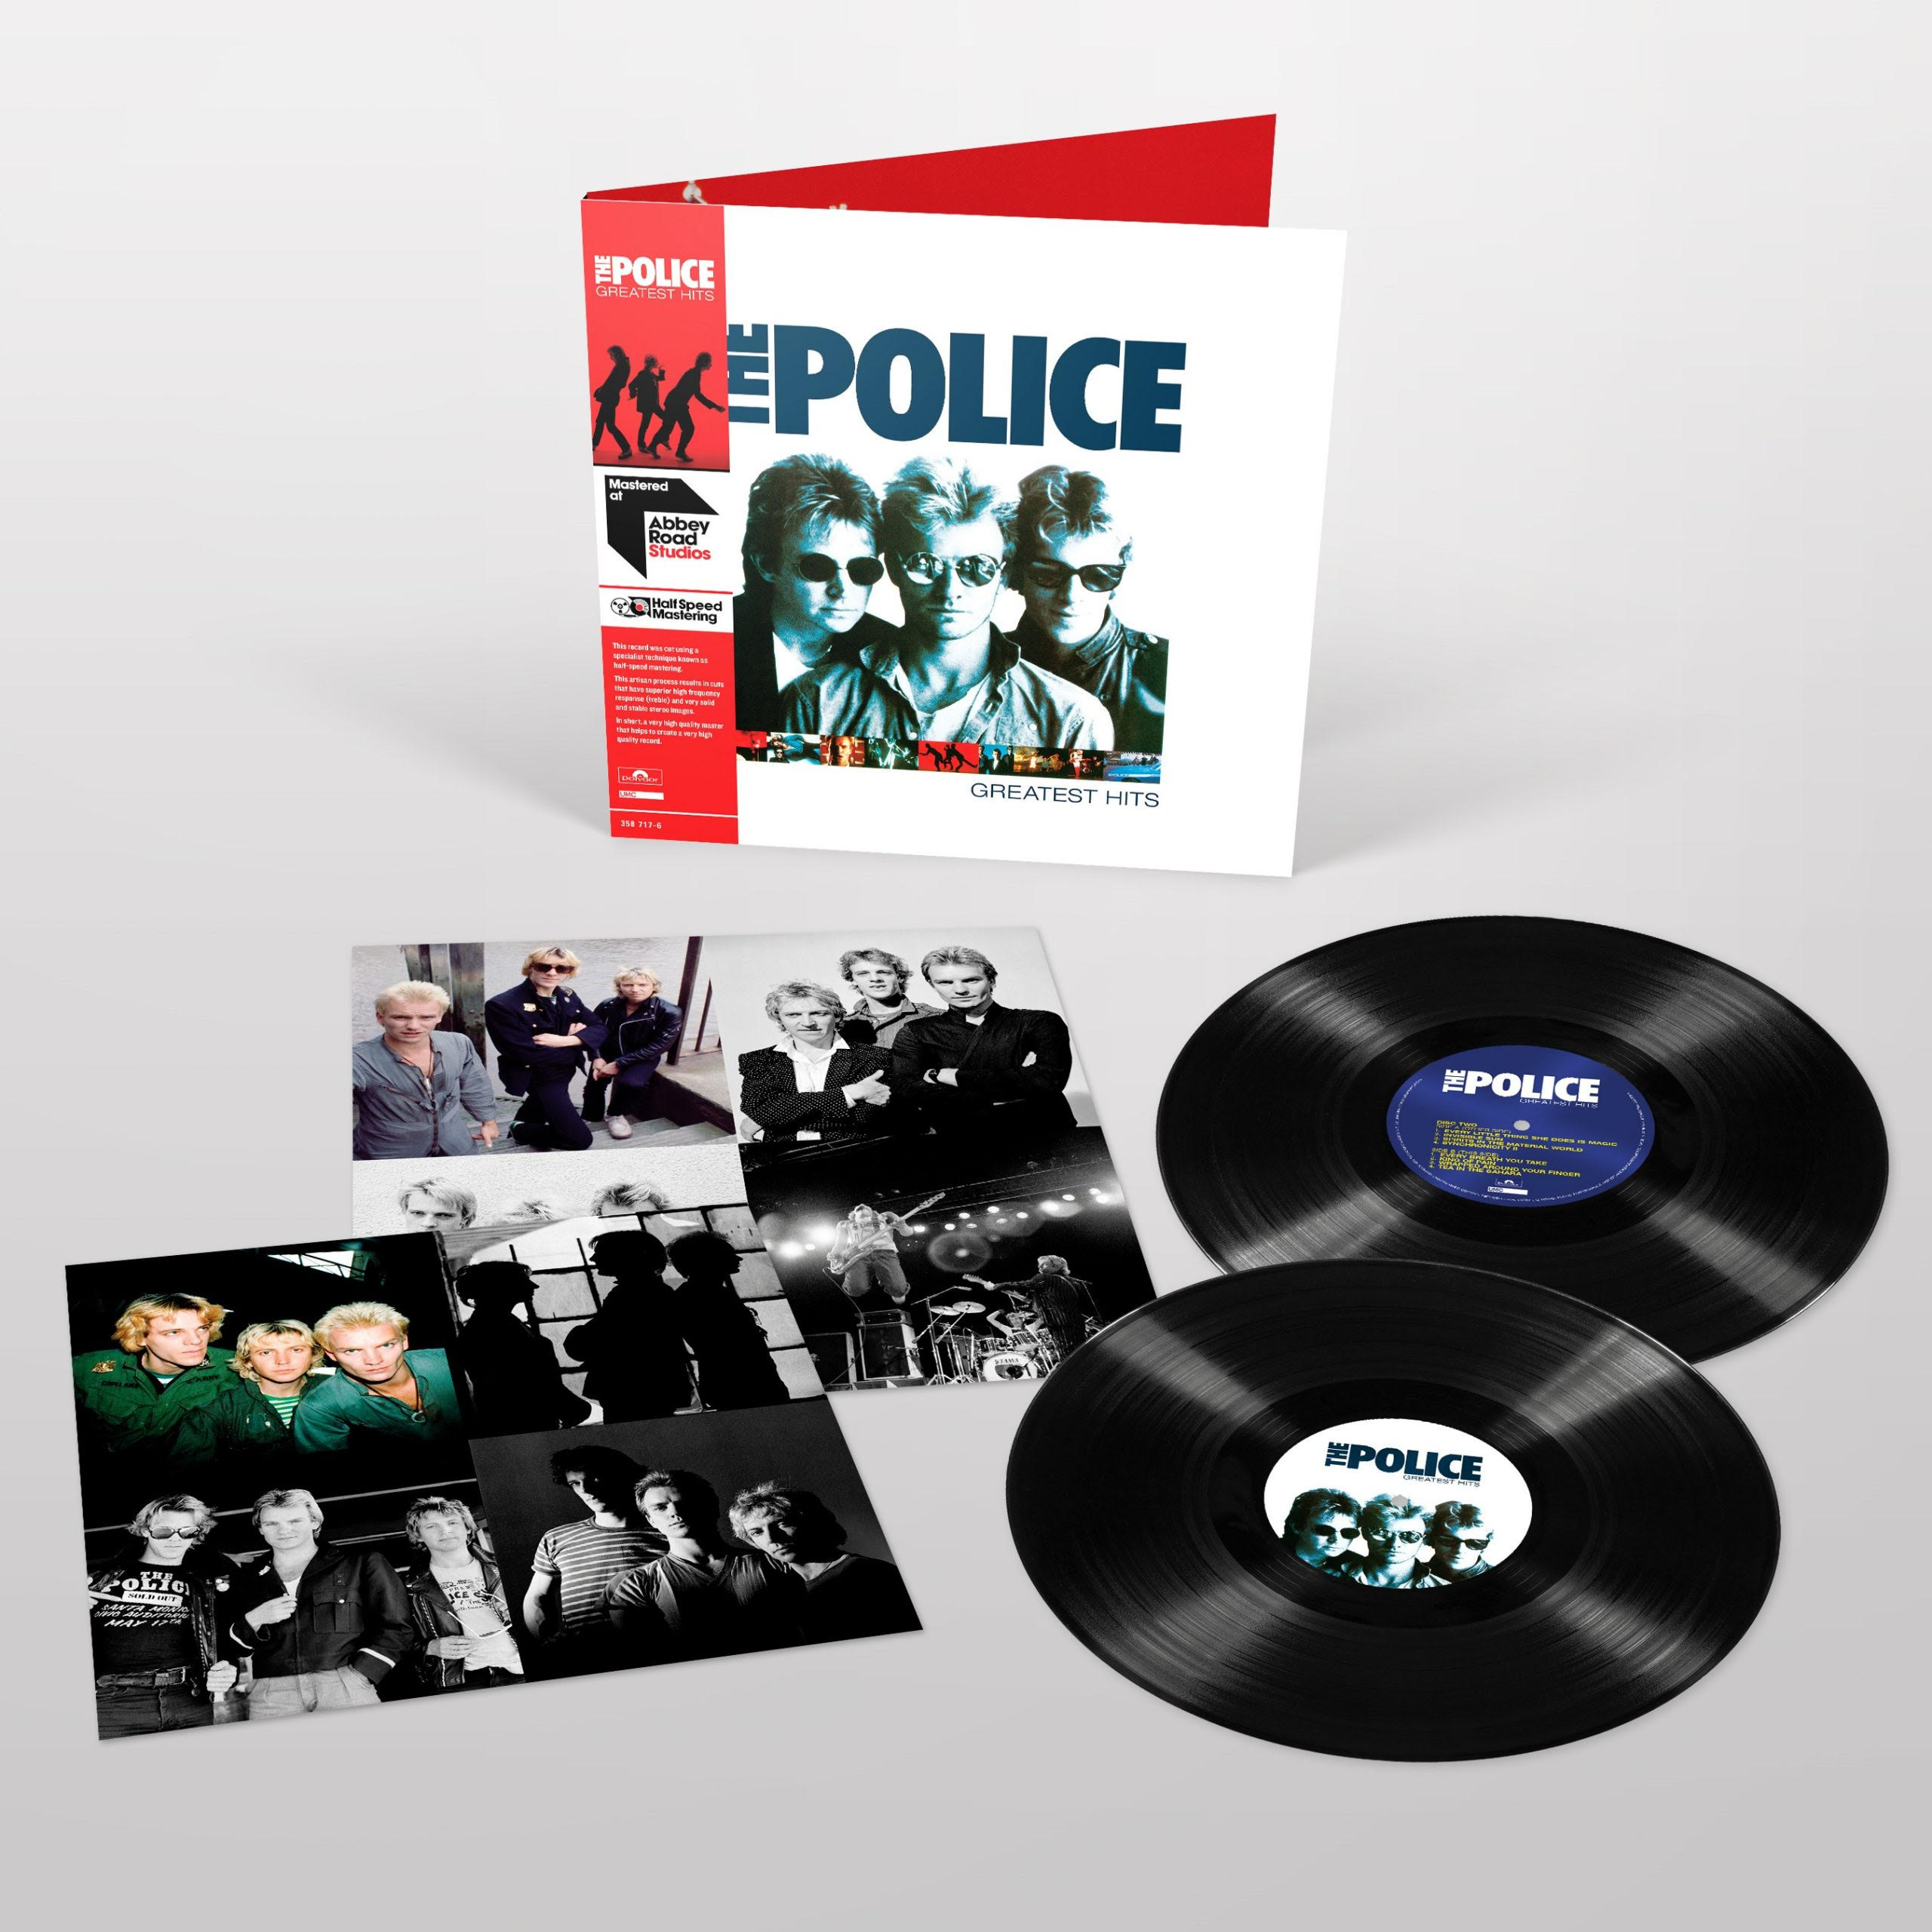 'The Police - Greatest Hits' Half-Speed Remaster, Double-LP, 30th Anniversary Edition - Released April 15, 2022